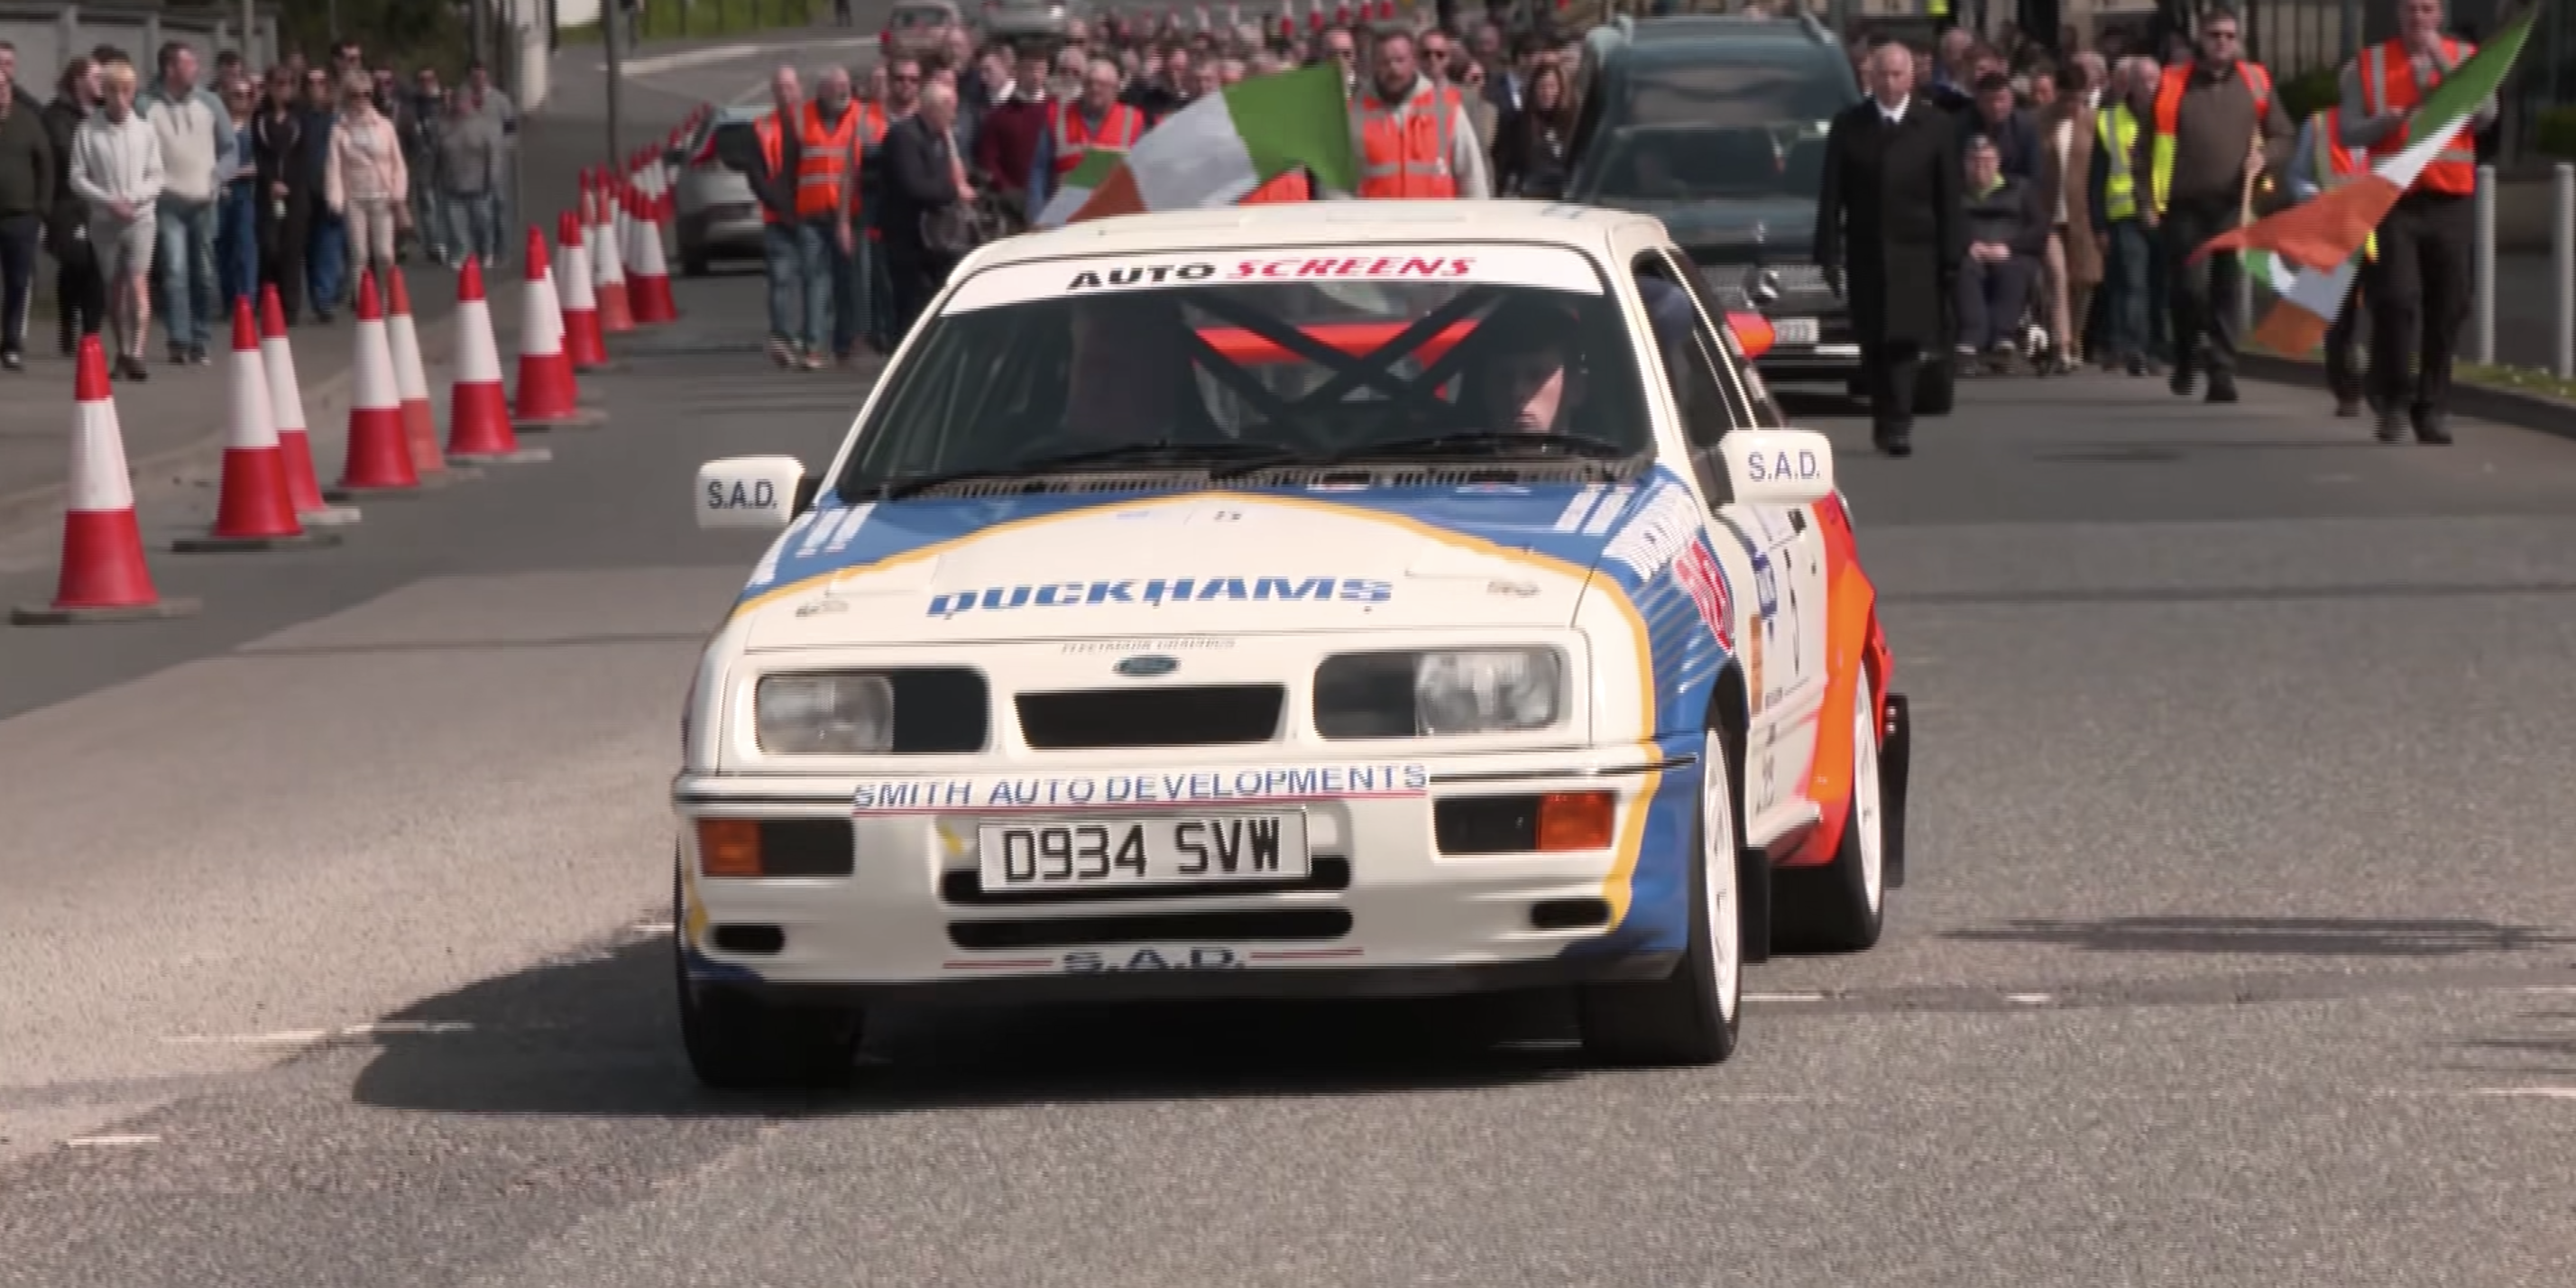 Craig Breen's Funeral Procession Was Led by His Own Ford Sierra Cosworth